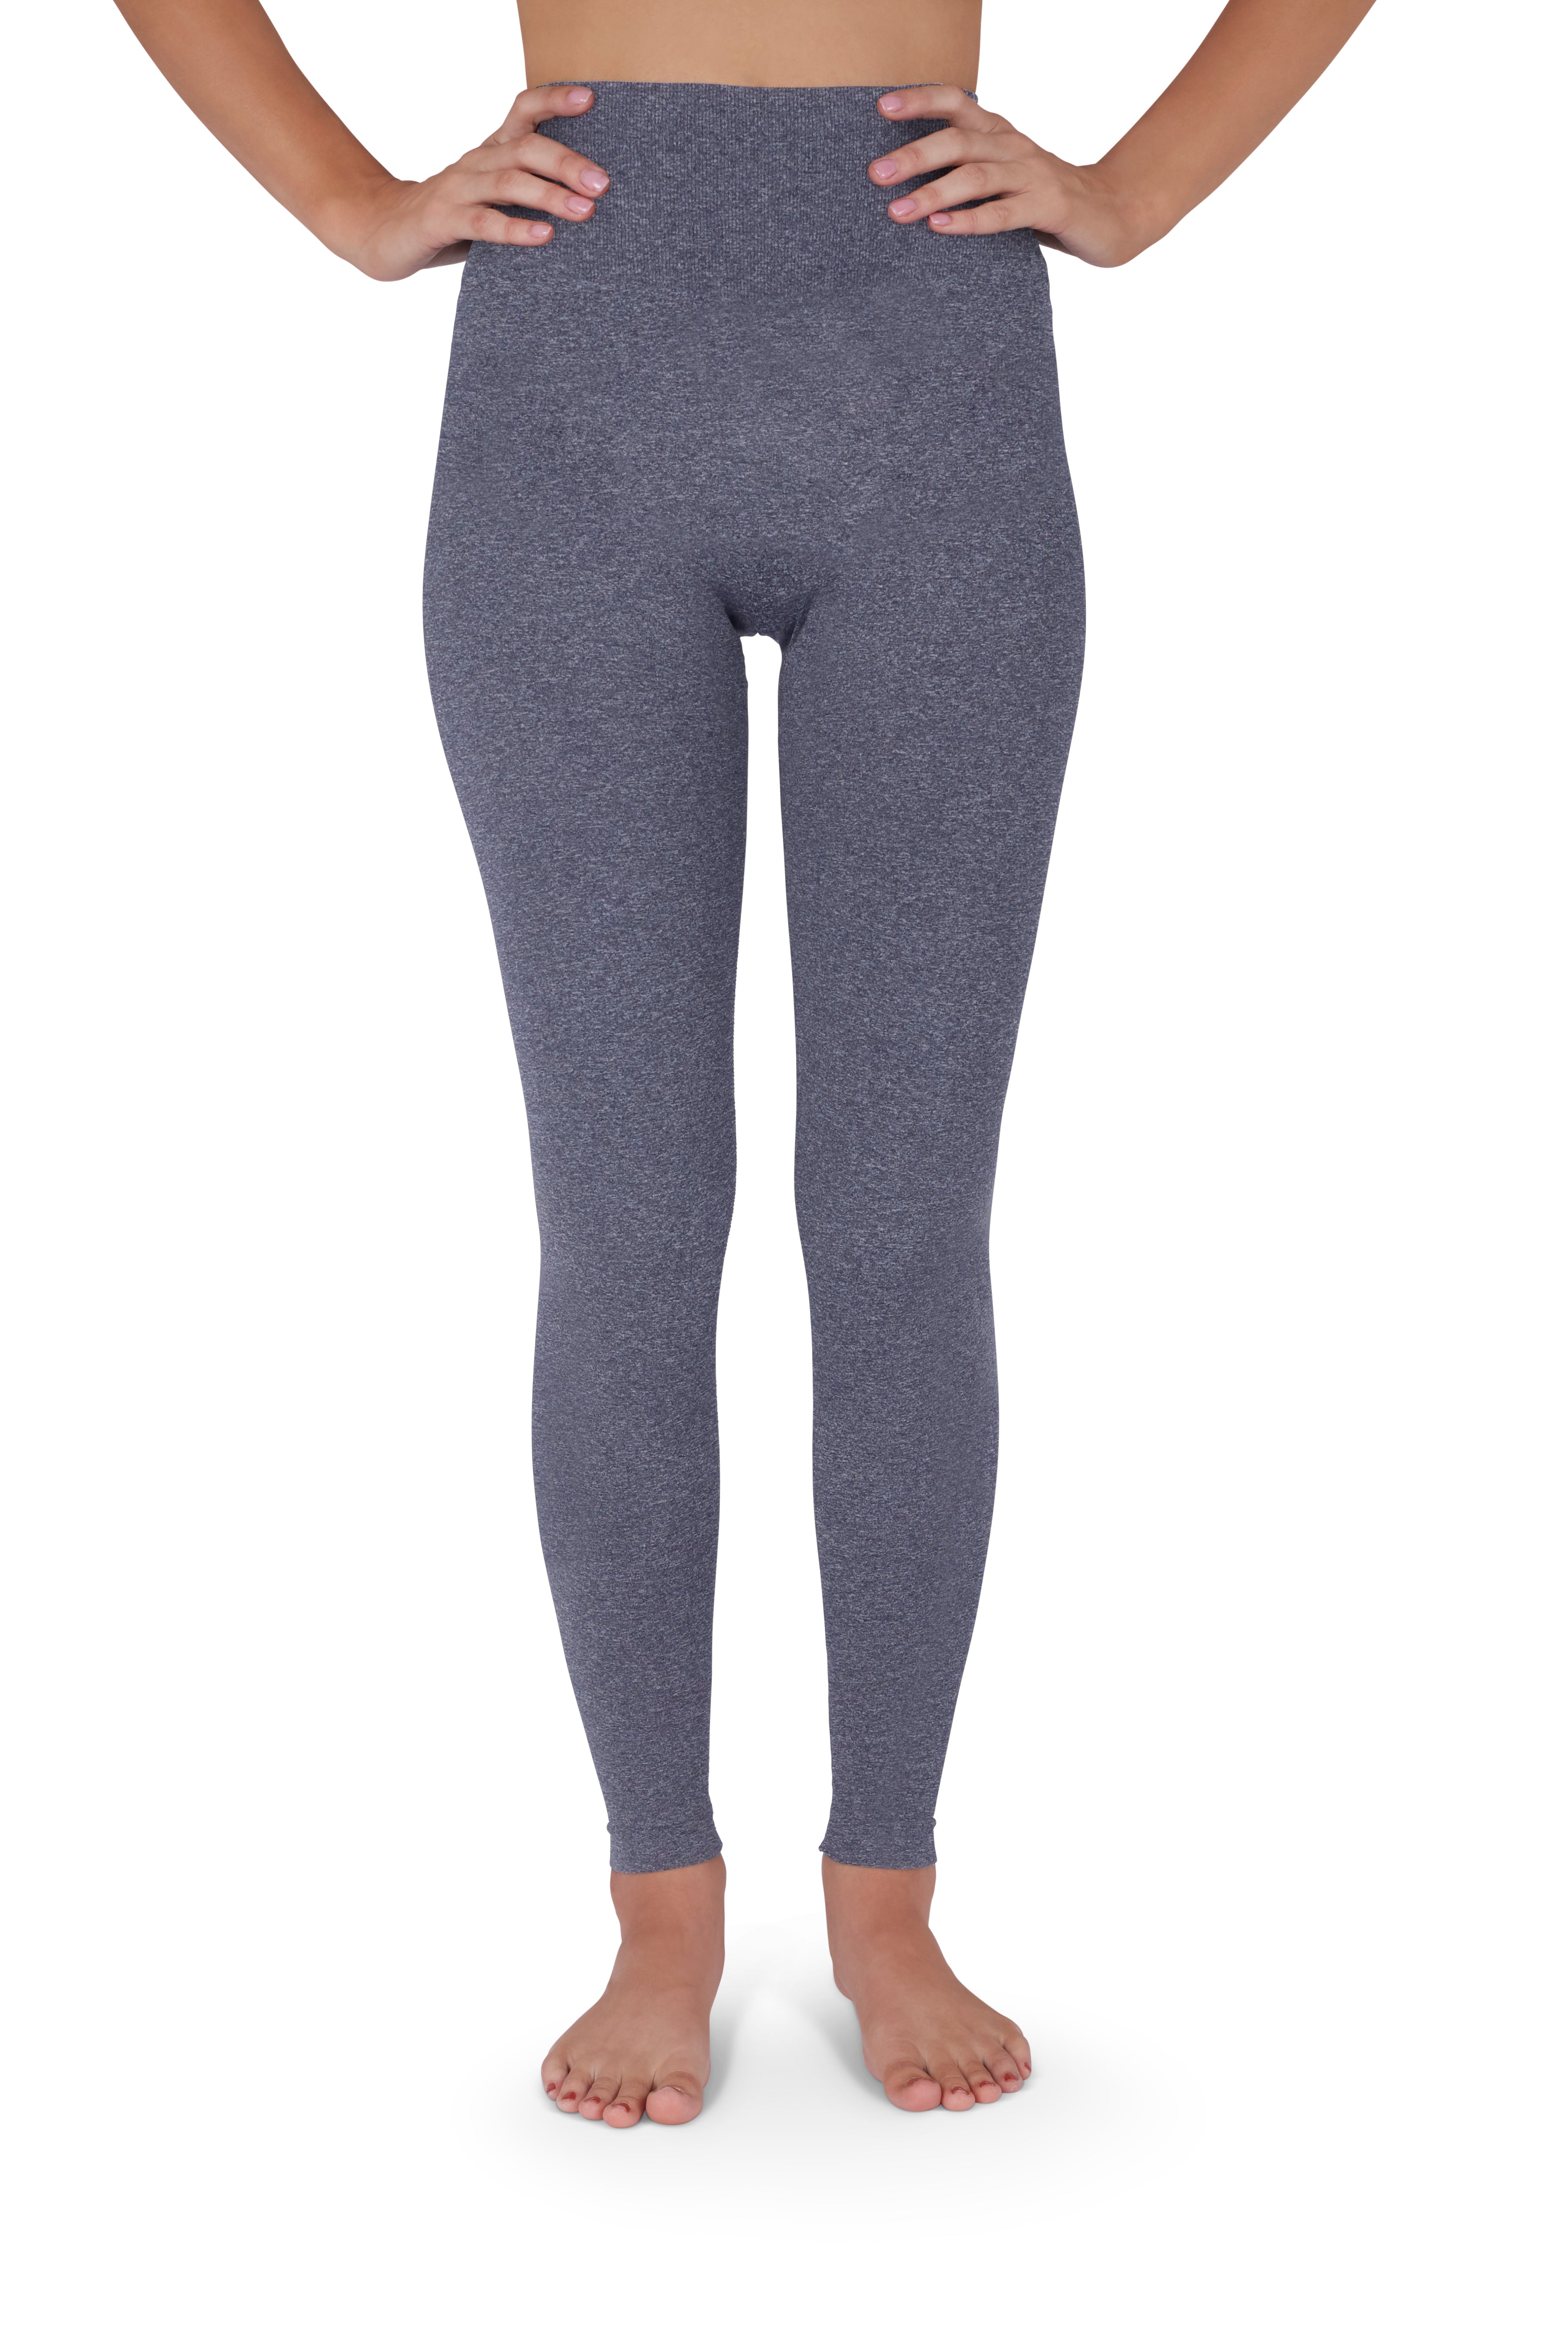 Seamless Compression Leggings V2 in Grey - Extra Firm